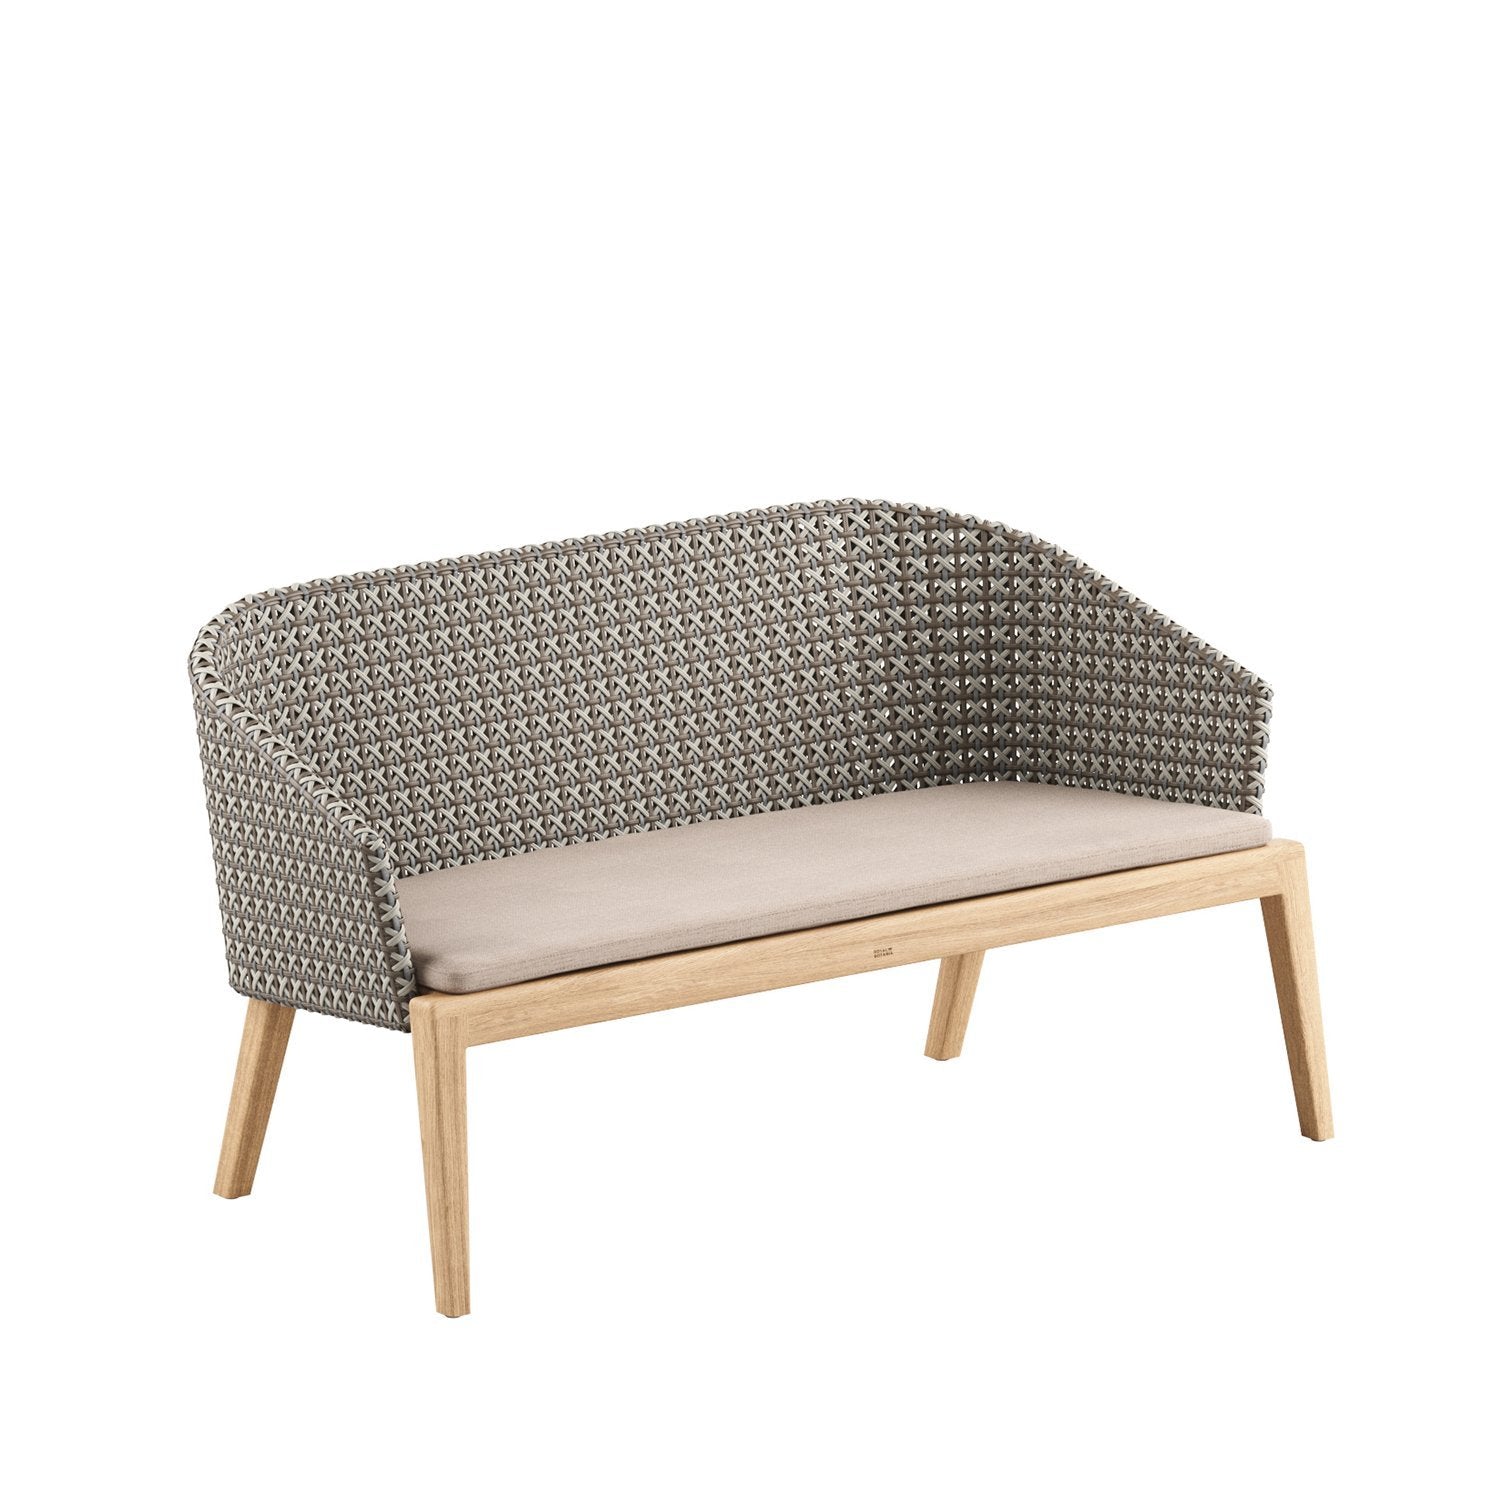 Calypso 135 Bench in All-Weather Weave